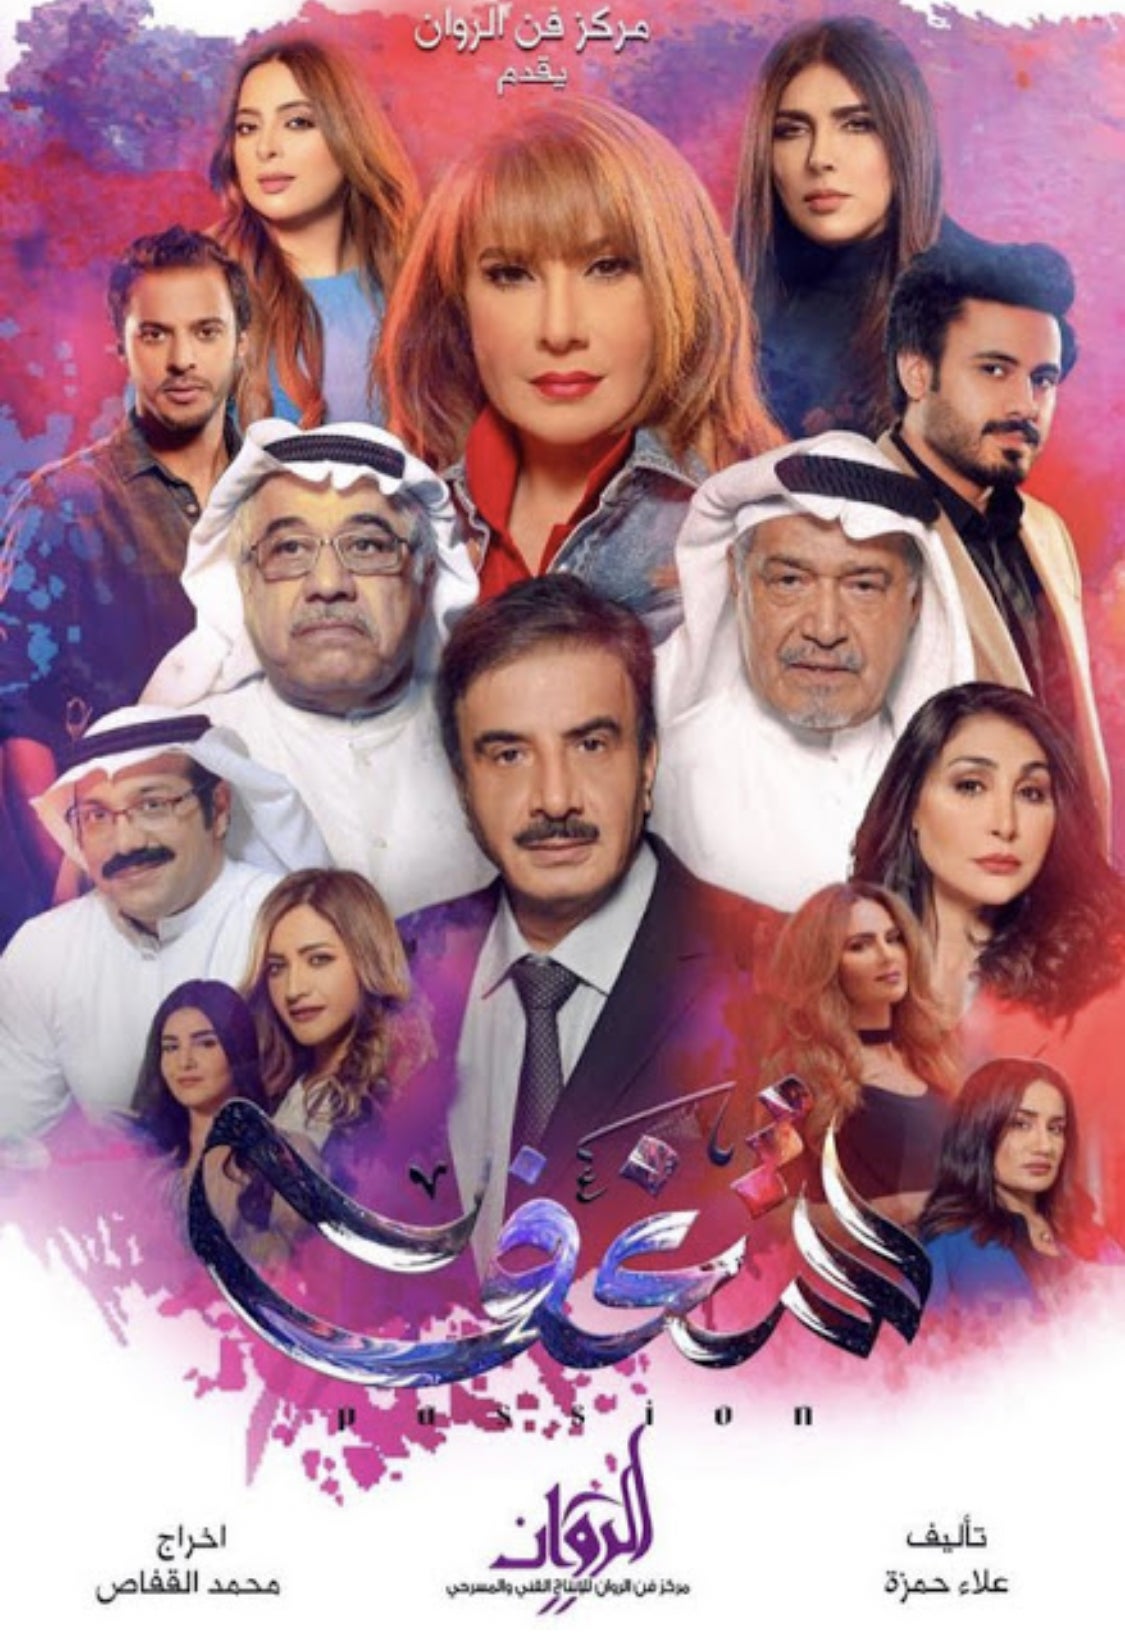 TV ratings for Shaghaf (شغف) in Italia. MBC 1 TV series